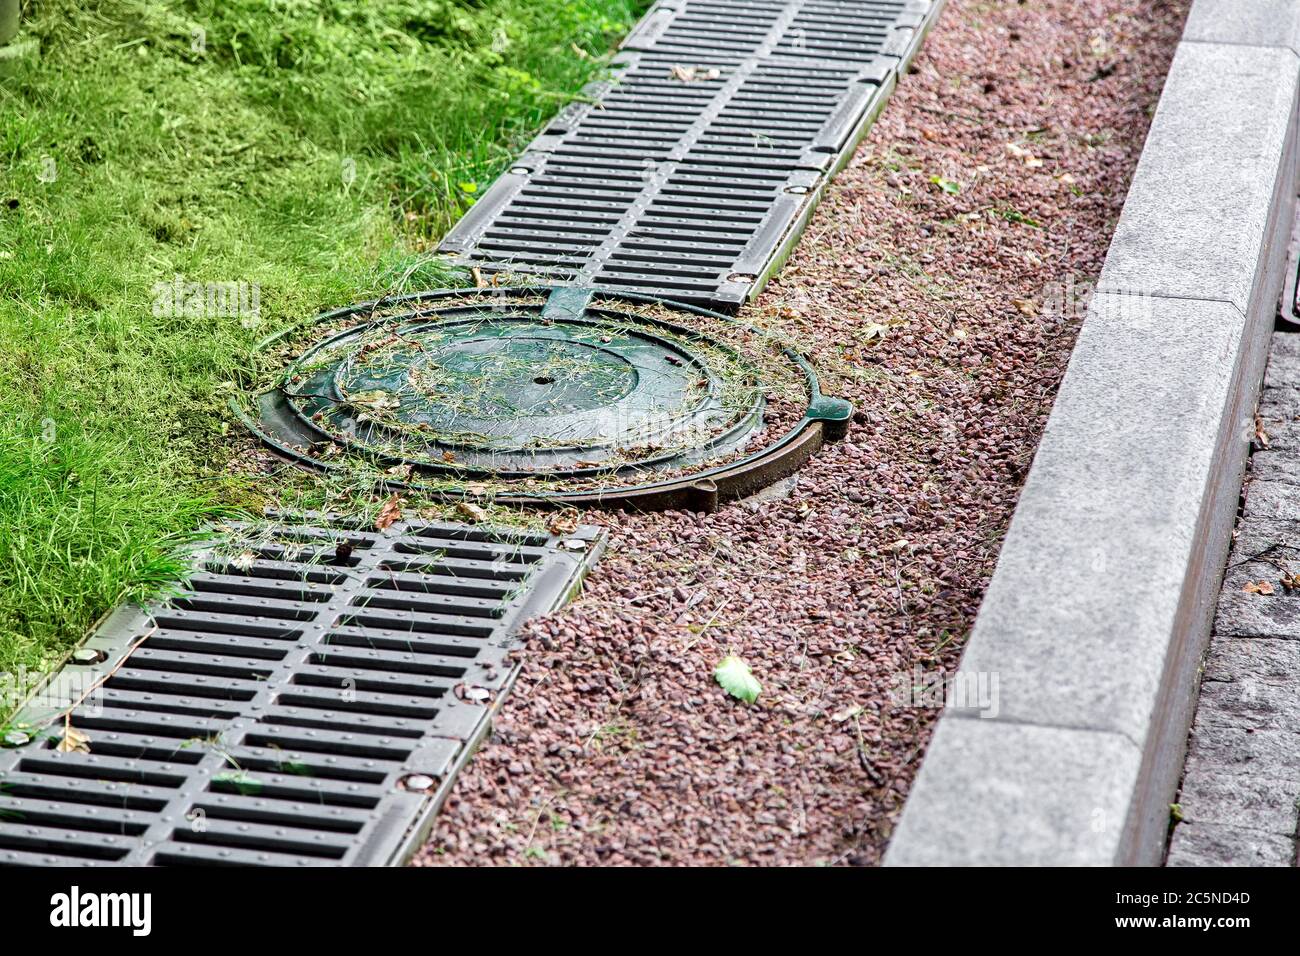 round manhole cover of drainage system on the side of the road with an iron grate and pebbles. Stock Photo